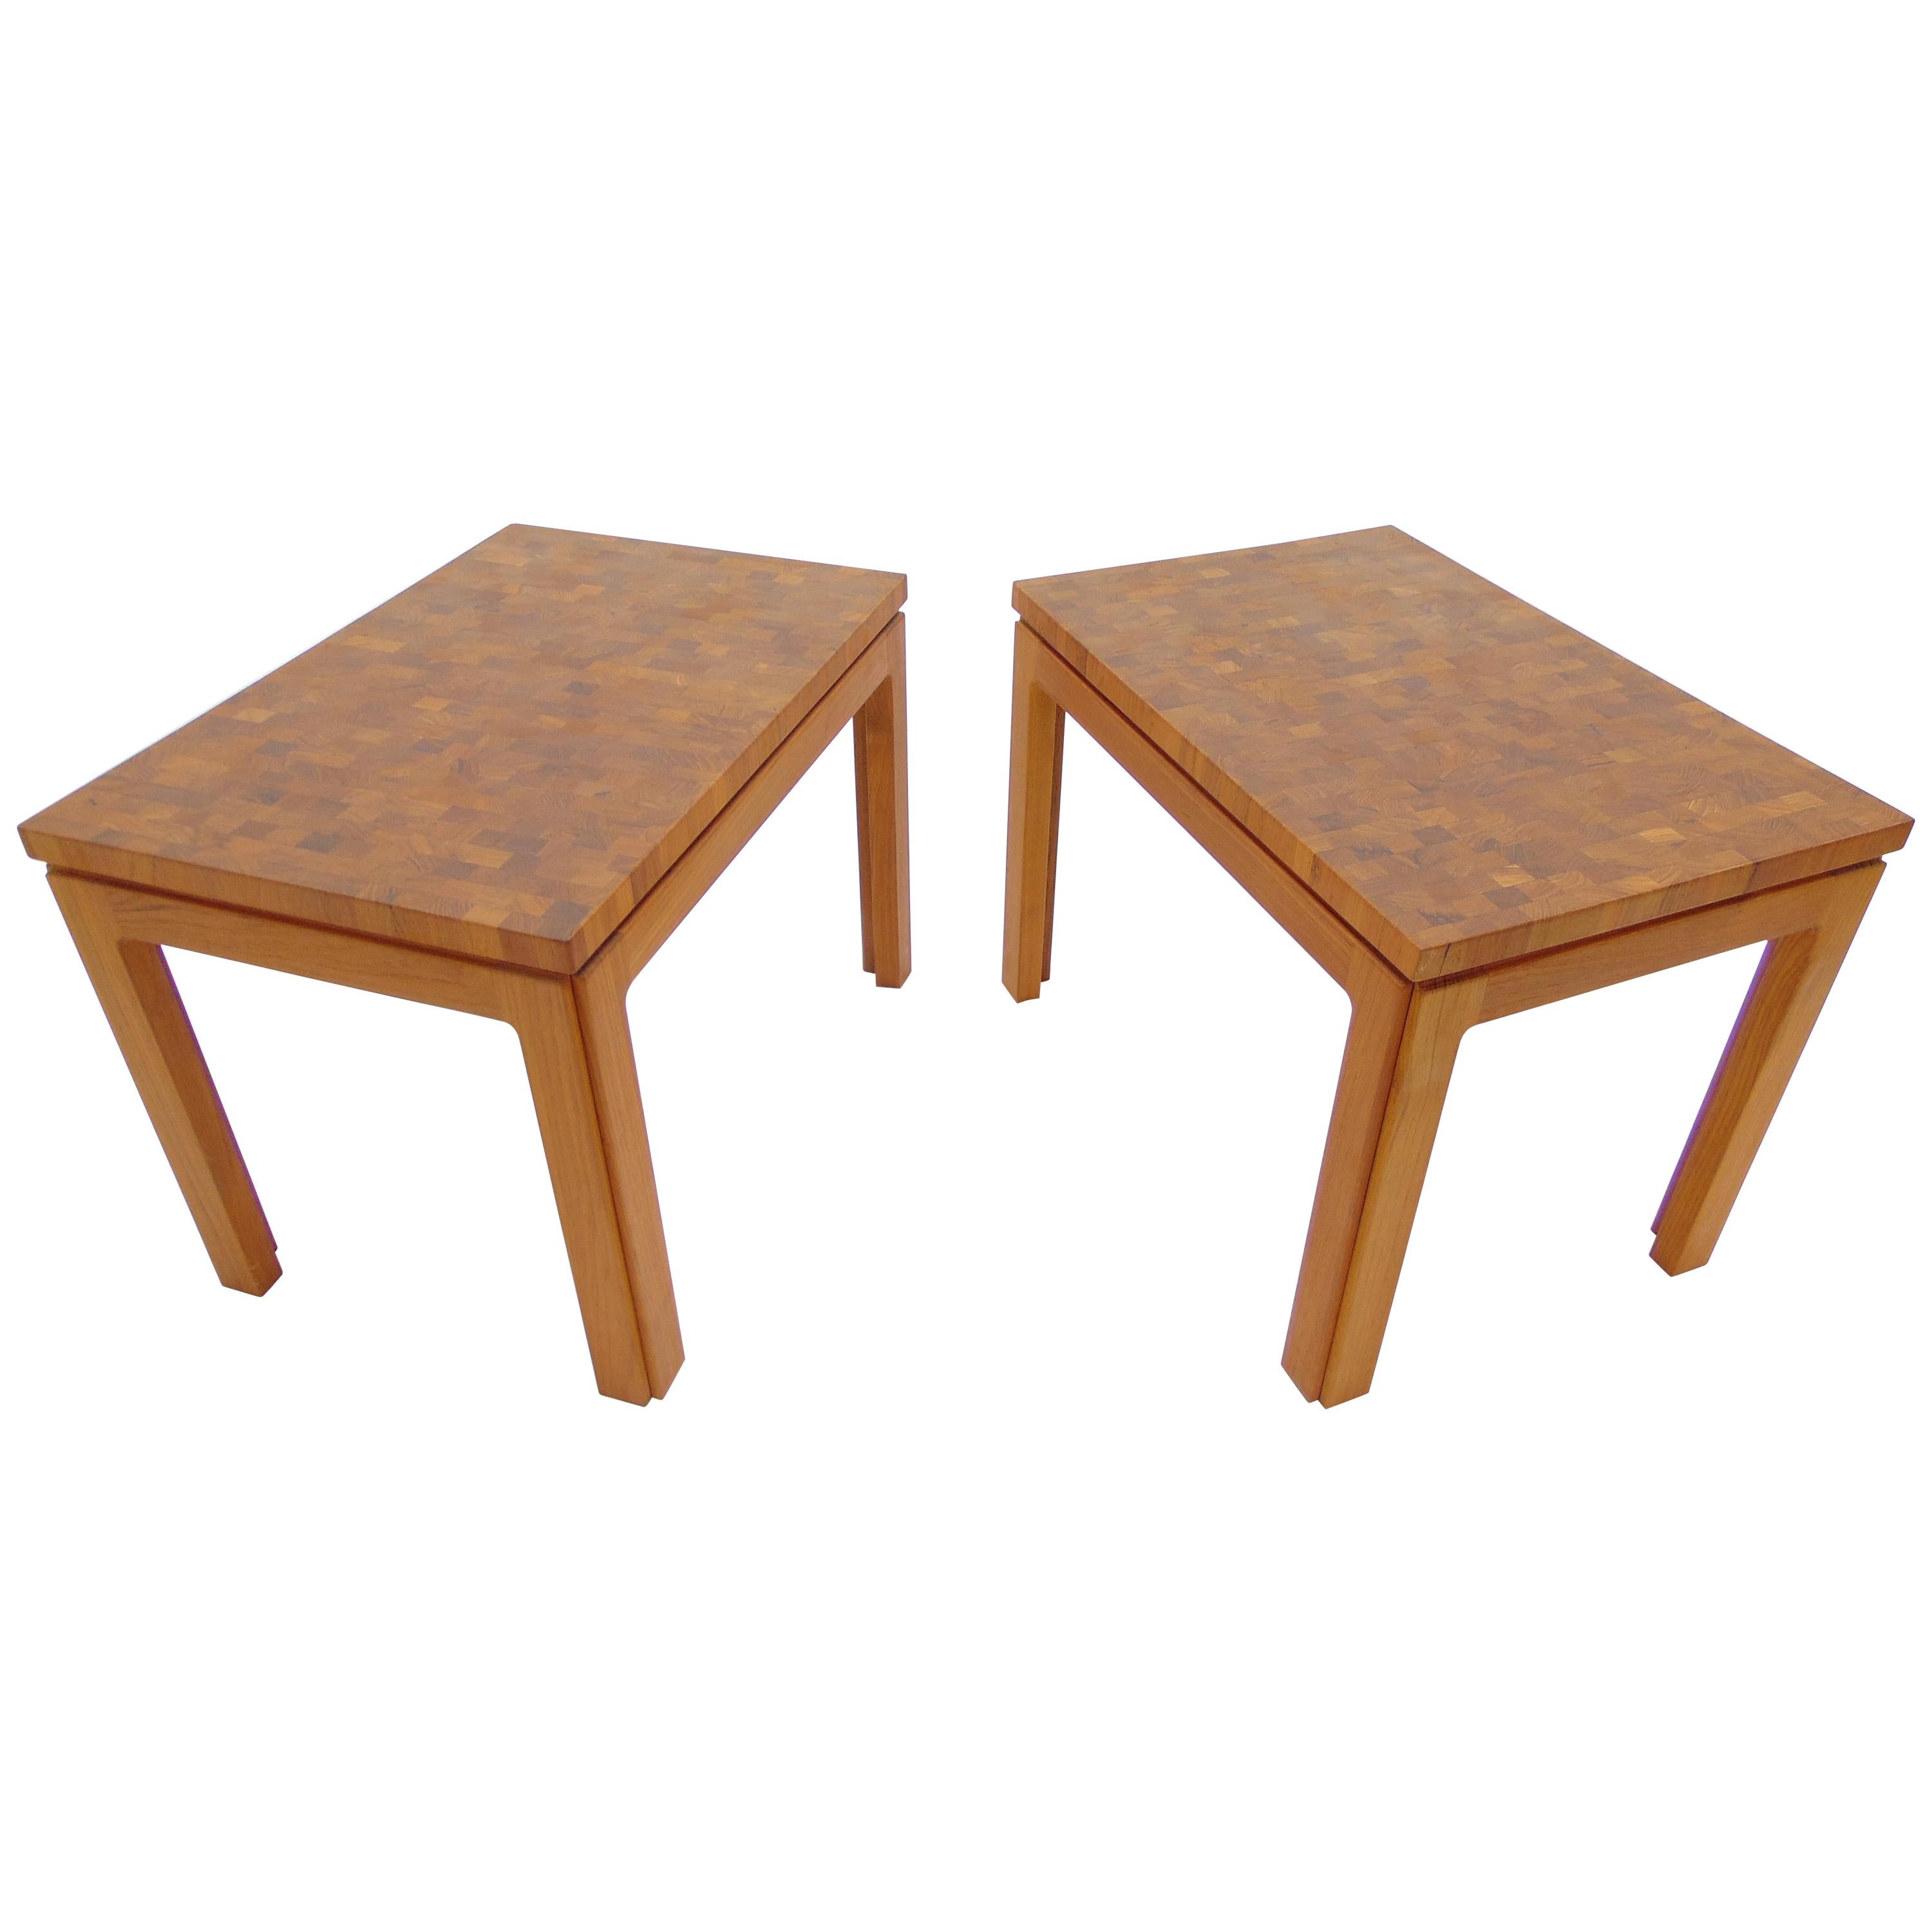 Tarm Stole Denmark Mid Century Teak Parquetry Wood Pair of Side Table For Sale